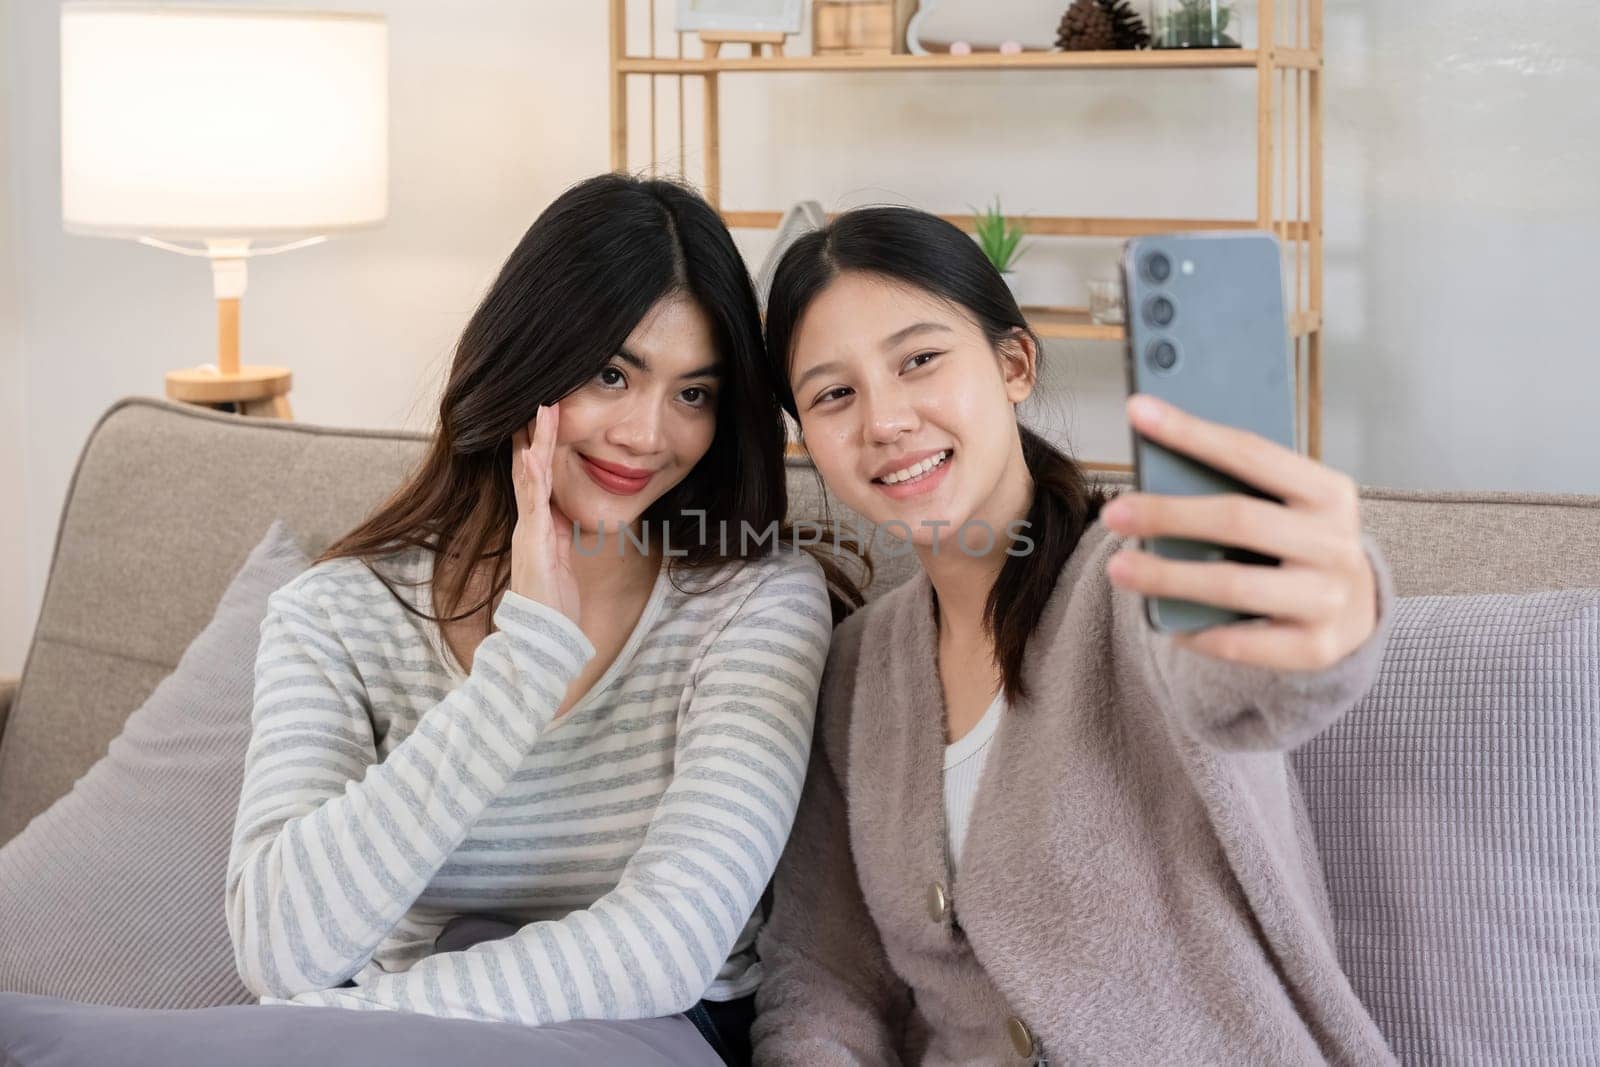 Asian lesbian couple taking a selfie on the sofa at home. Concept of love, togetherness, and capturing happy moments in a cozy indoor setting.